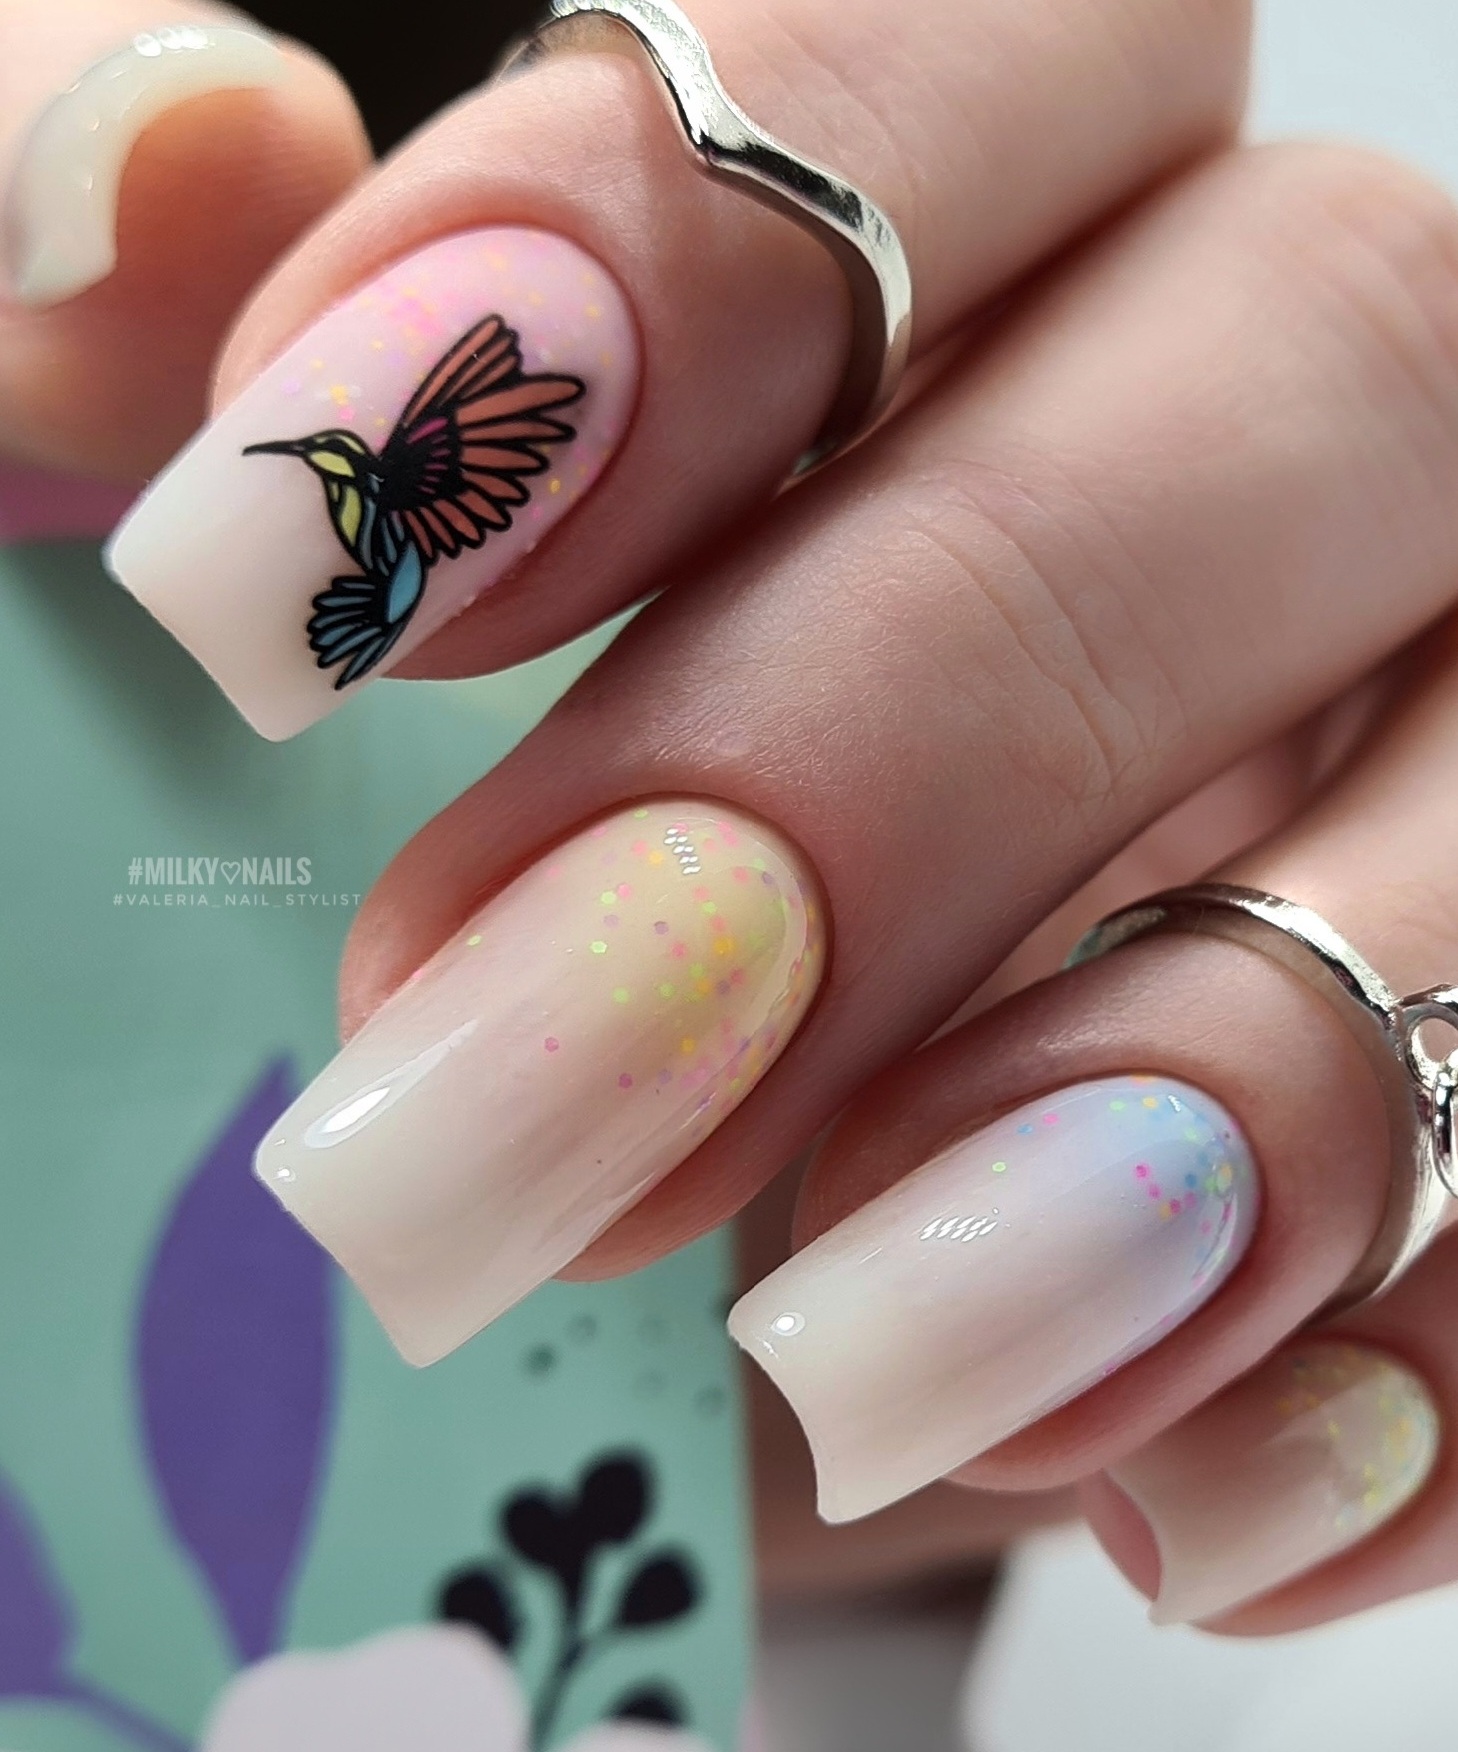 Swanky Stamping, Пластина 075